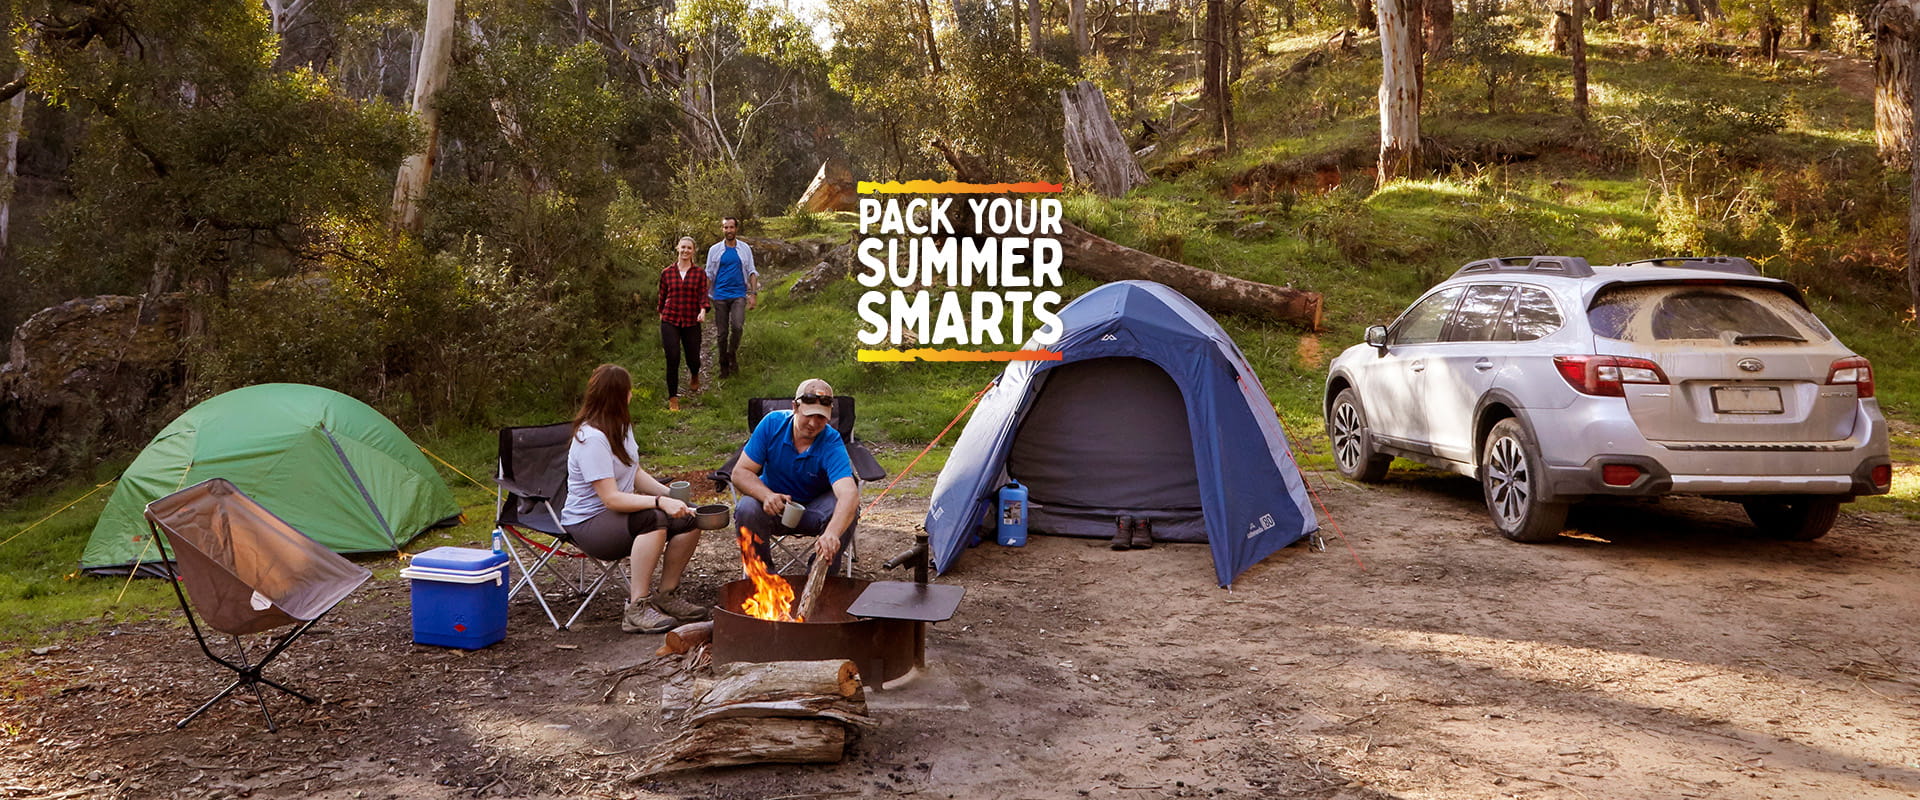 Four friends at a campsite with tents and a car with the text overlay 'pack your summer smarts'.